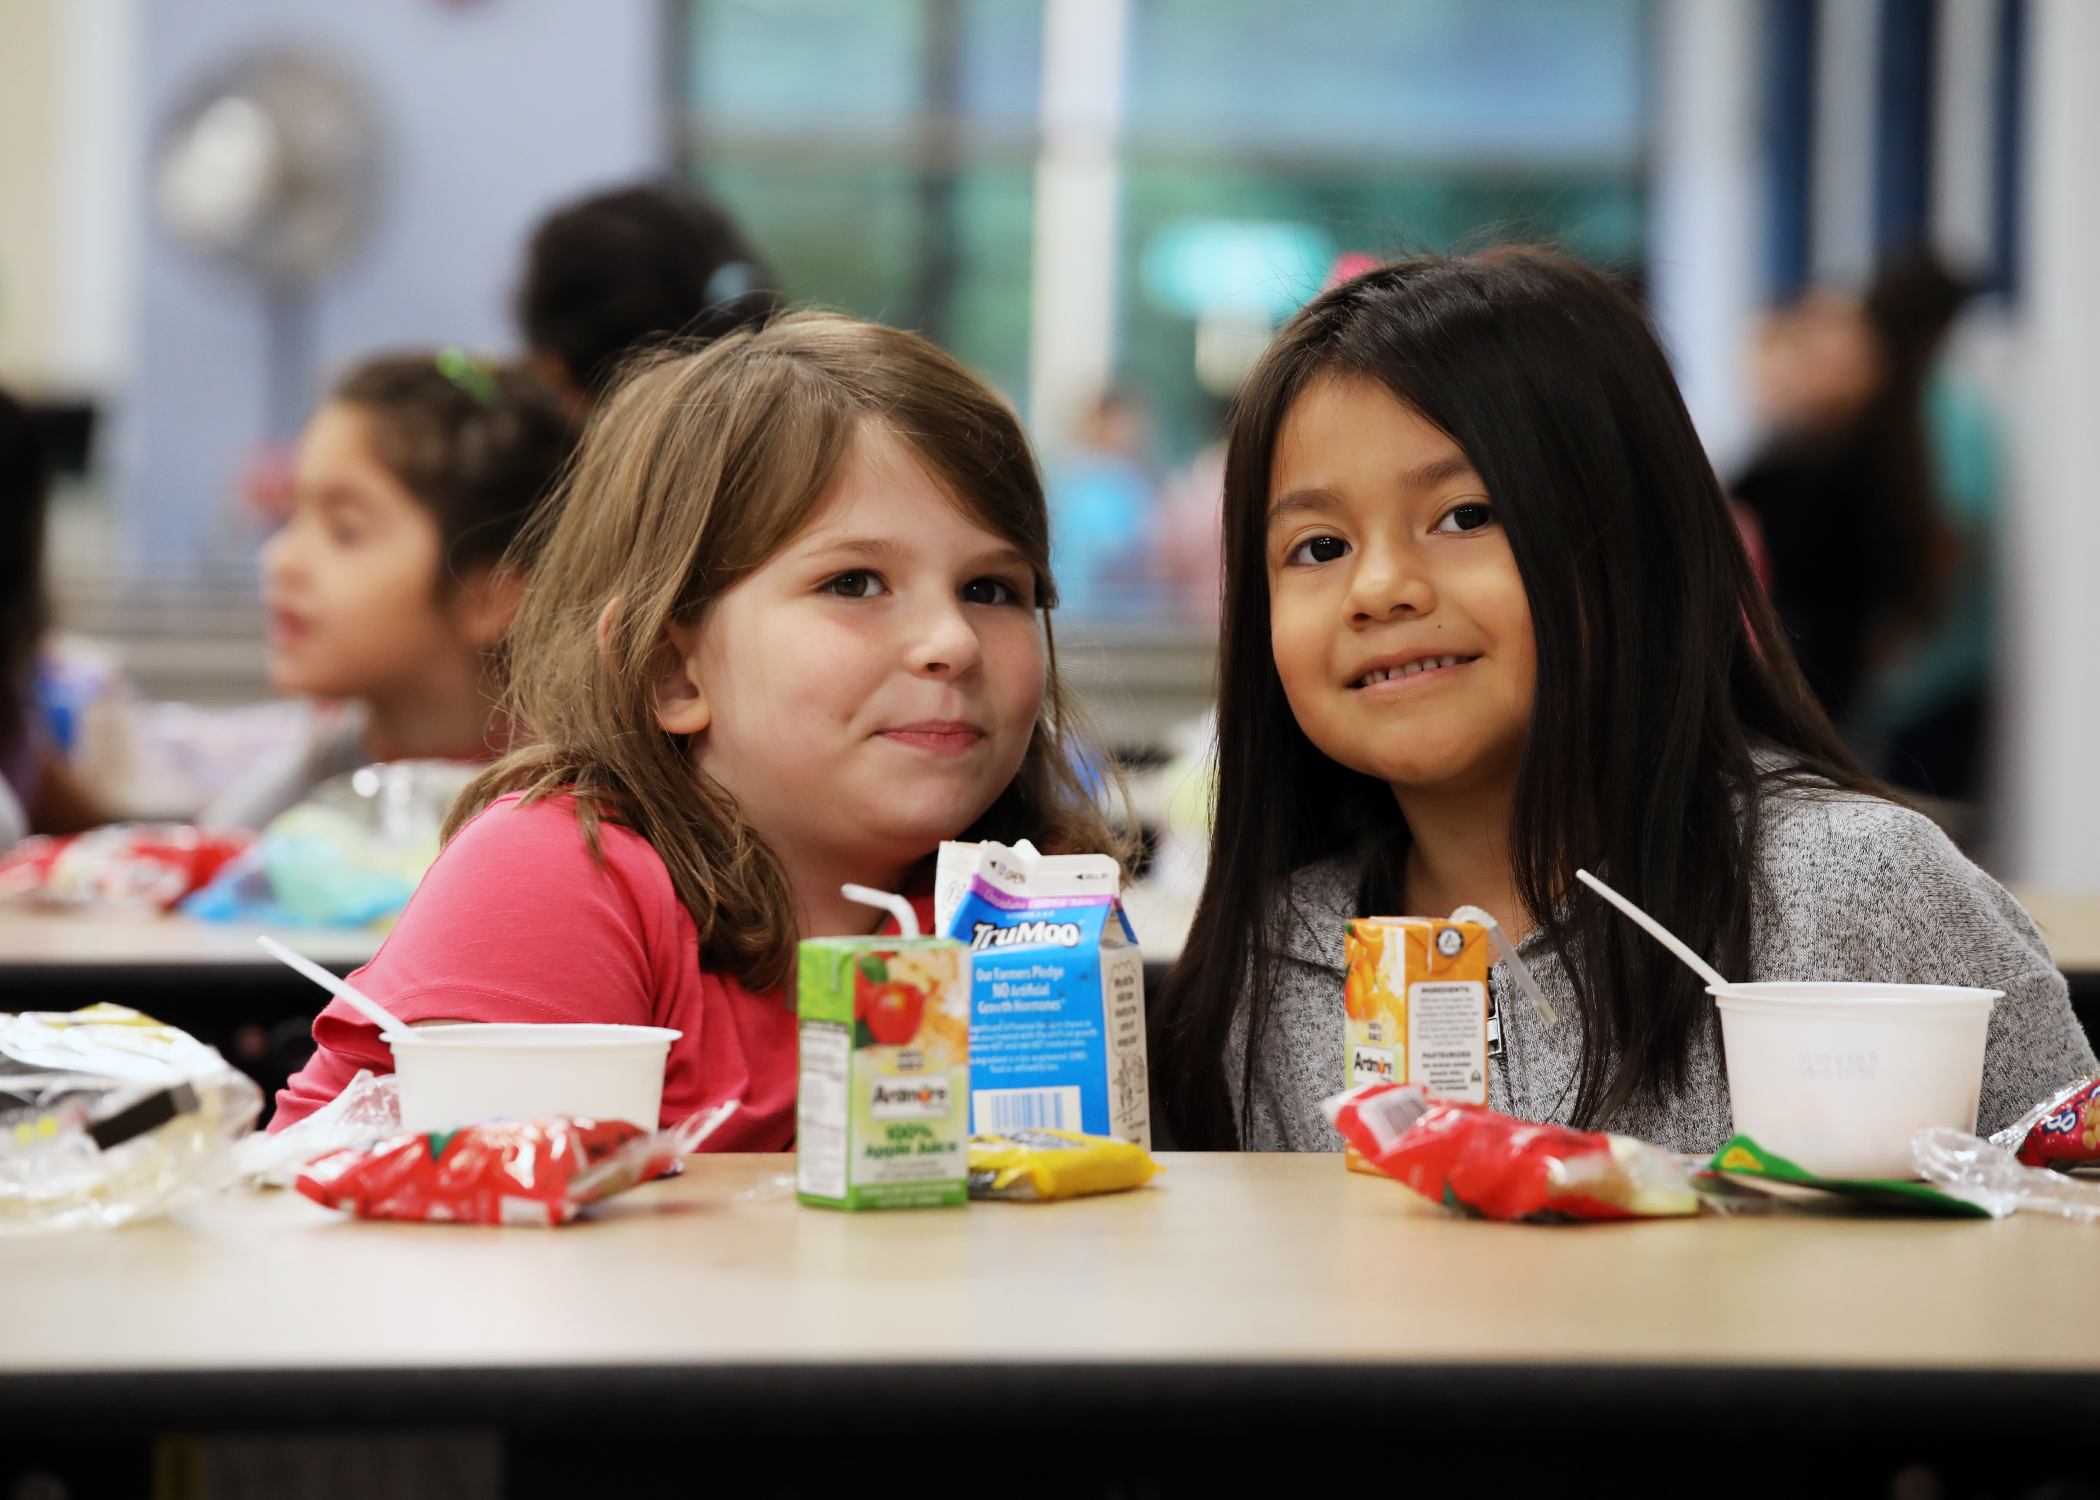 Two children pose for a picture in the cafeteria